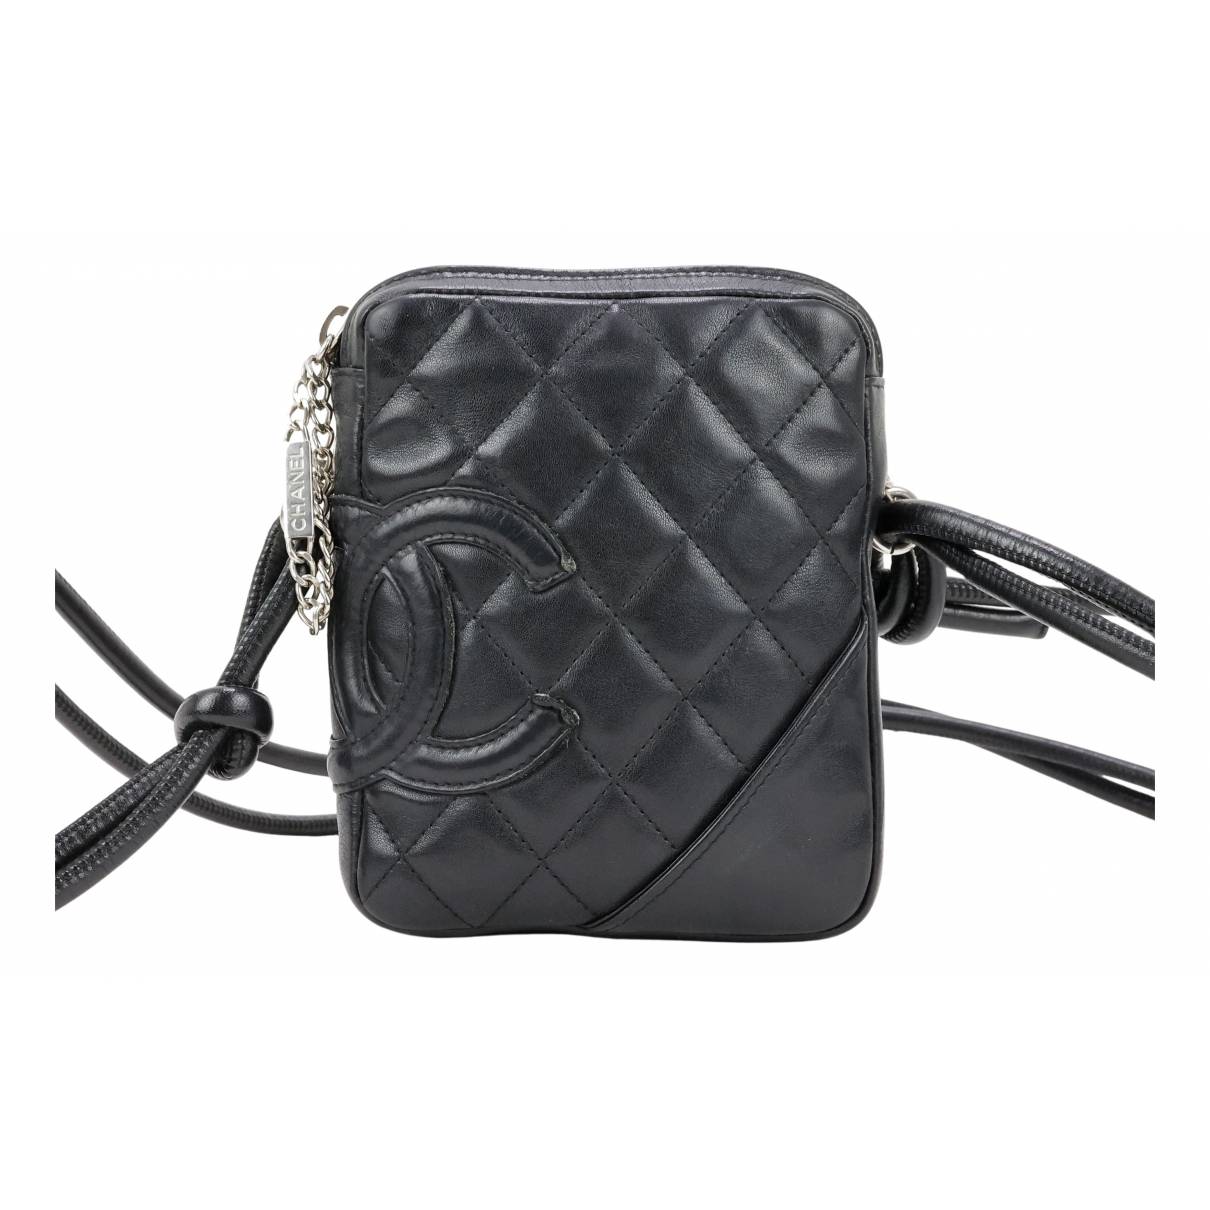 How to Authenticate a Chanel Handbag - Chanel Authenticity Guide – Love  that Bag etc - Preowned Designer Fashions